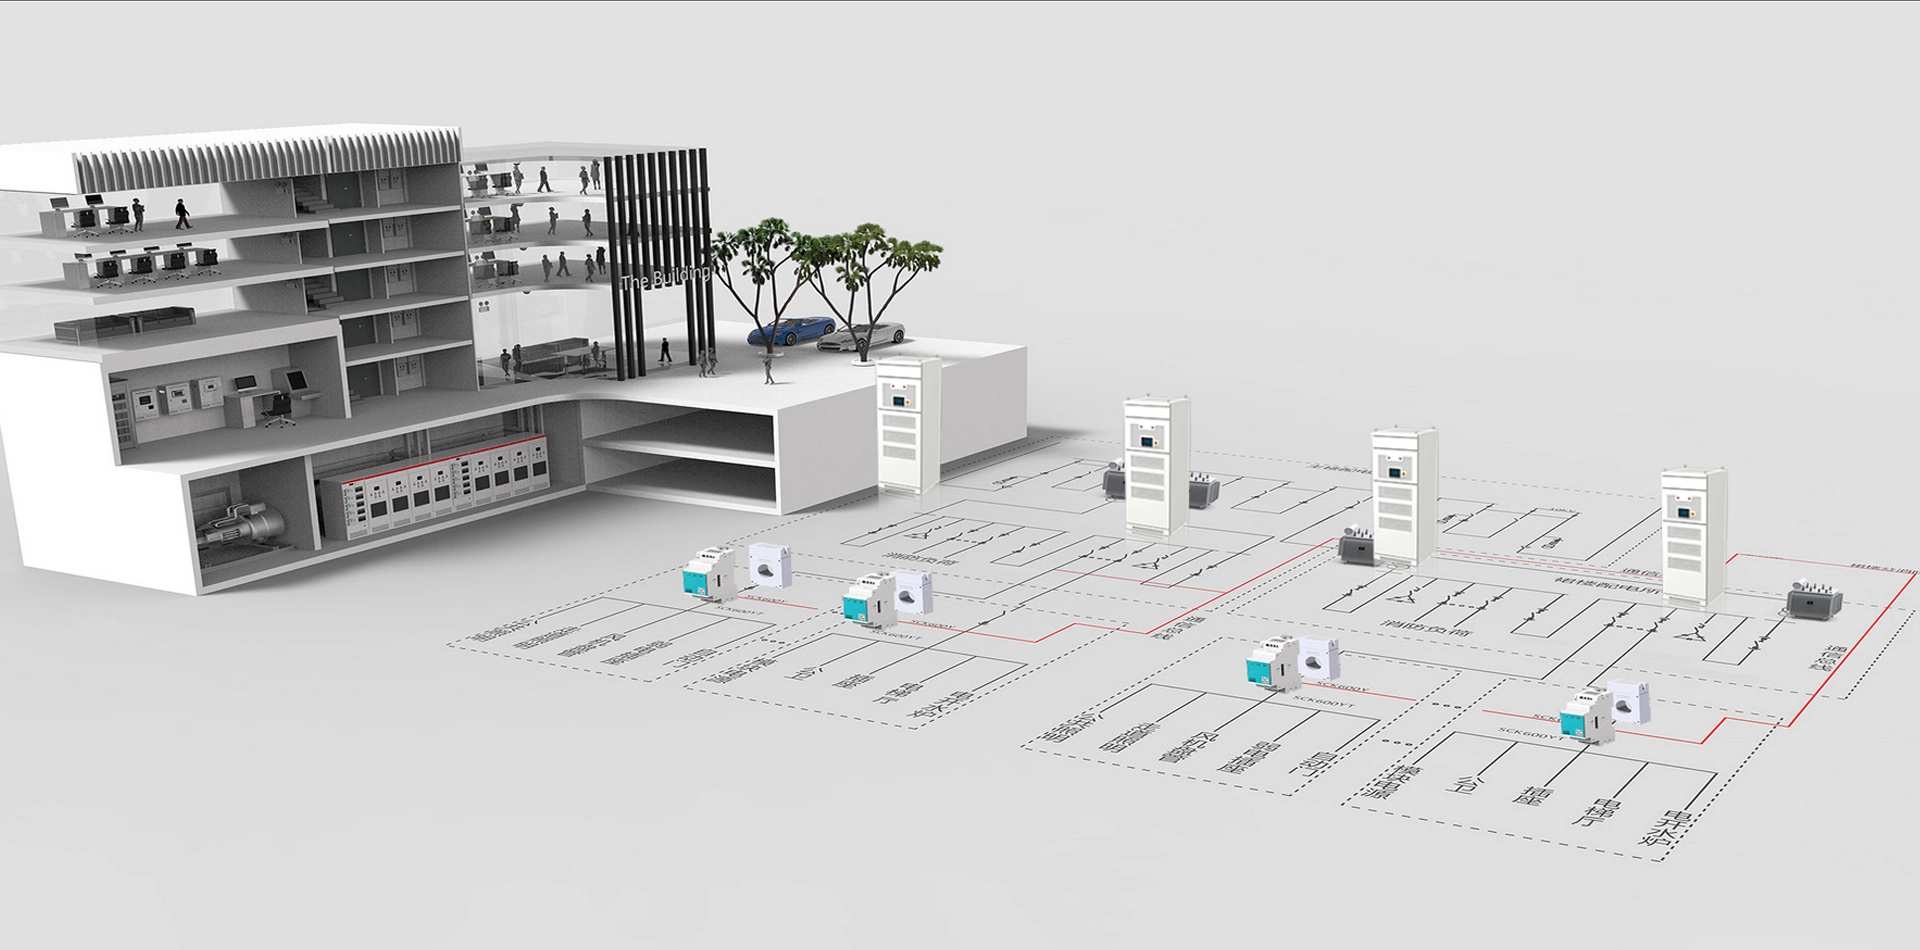 Power Quality Analysis and Management Solution for Intelligent Buildings